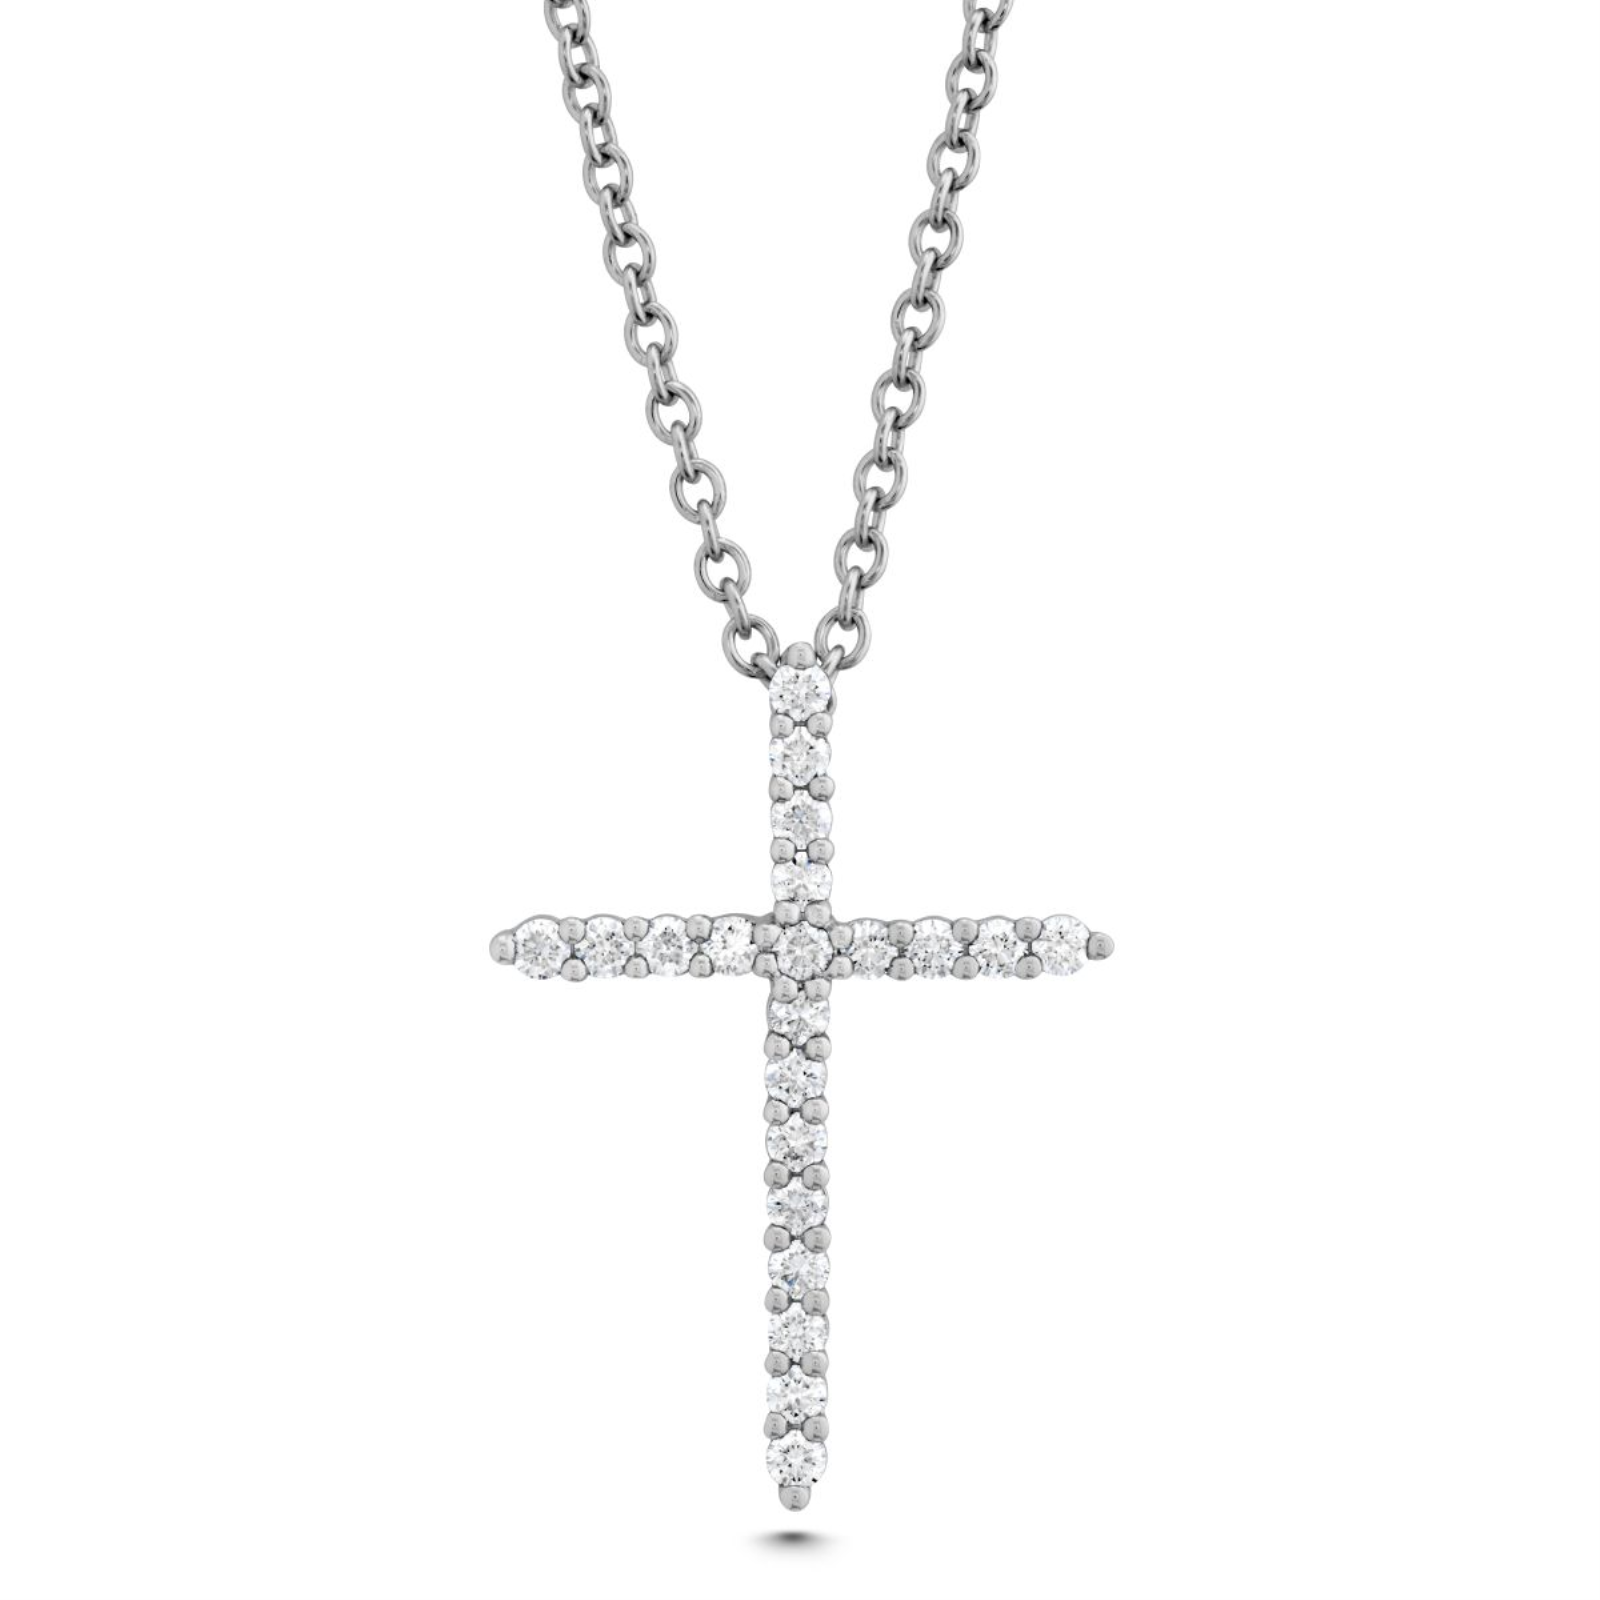 White Gold and Diamond Cross Necklace